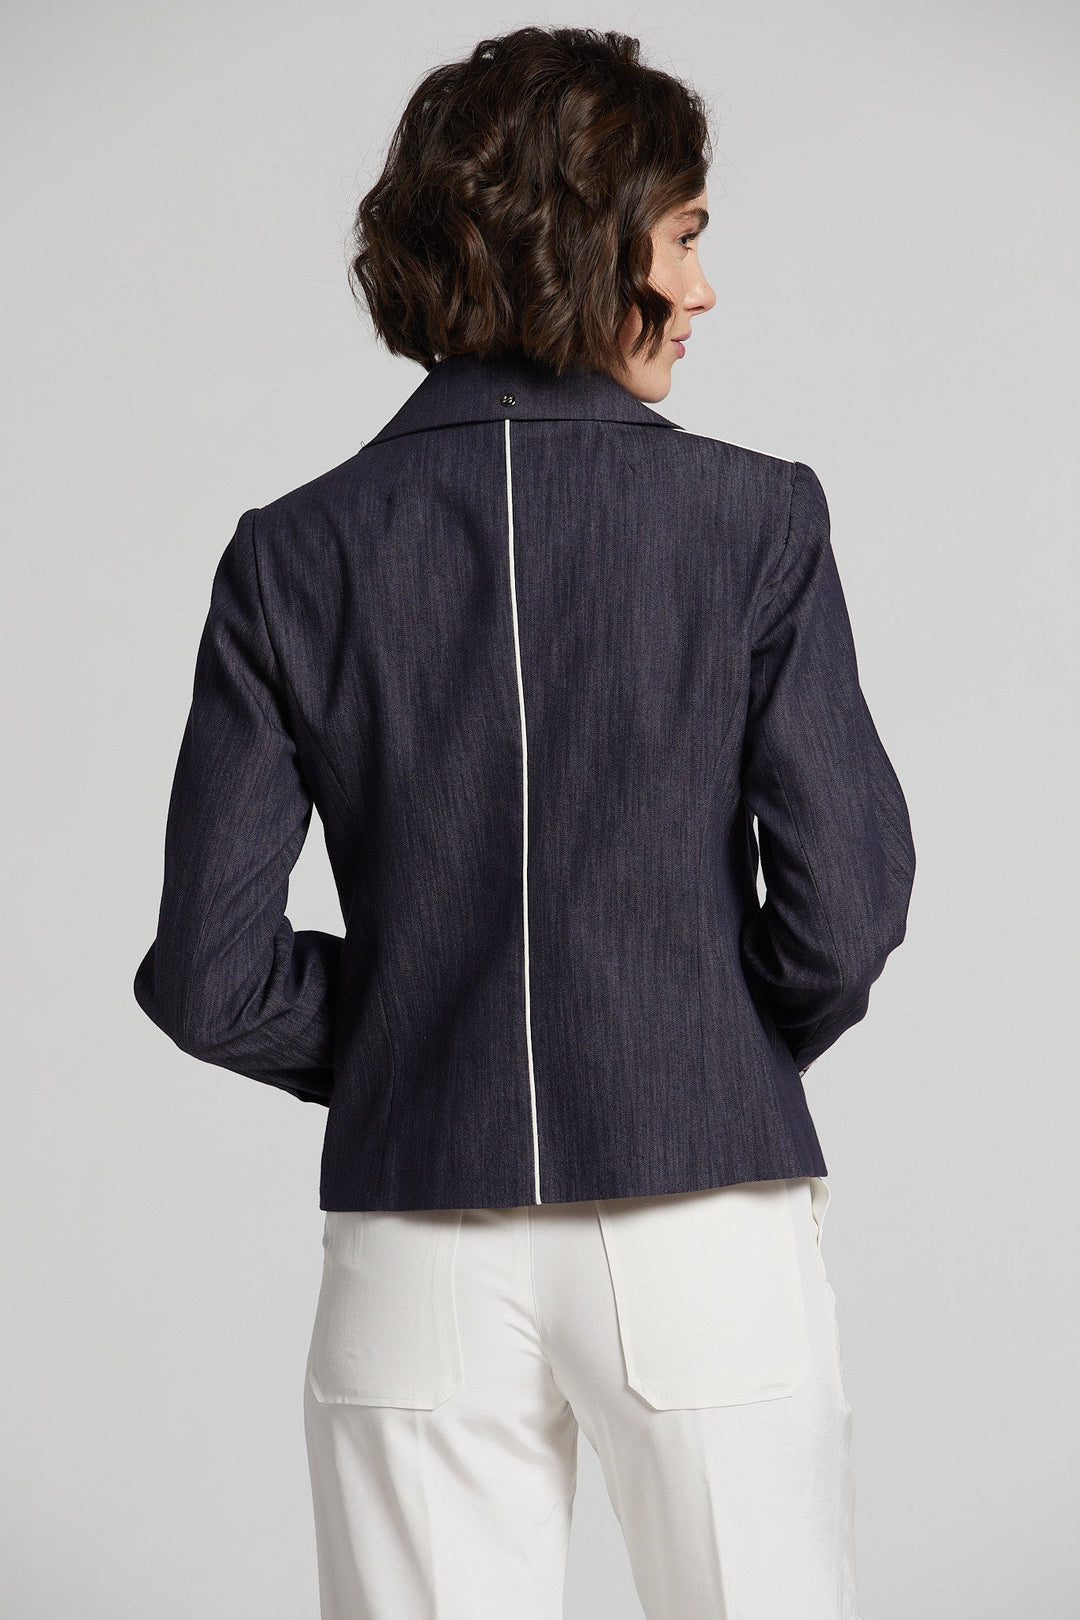 Noa Single Breasted Stretch Blazer With Piping - Denim Blue/White